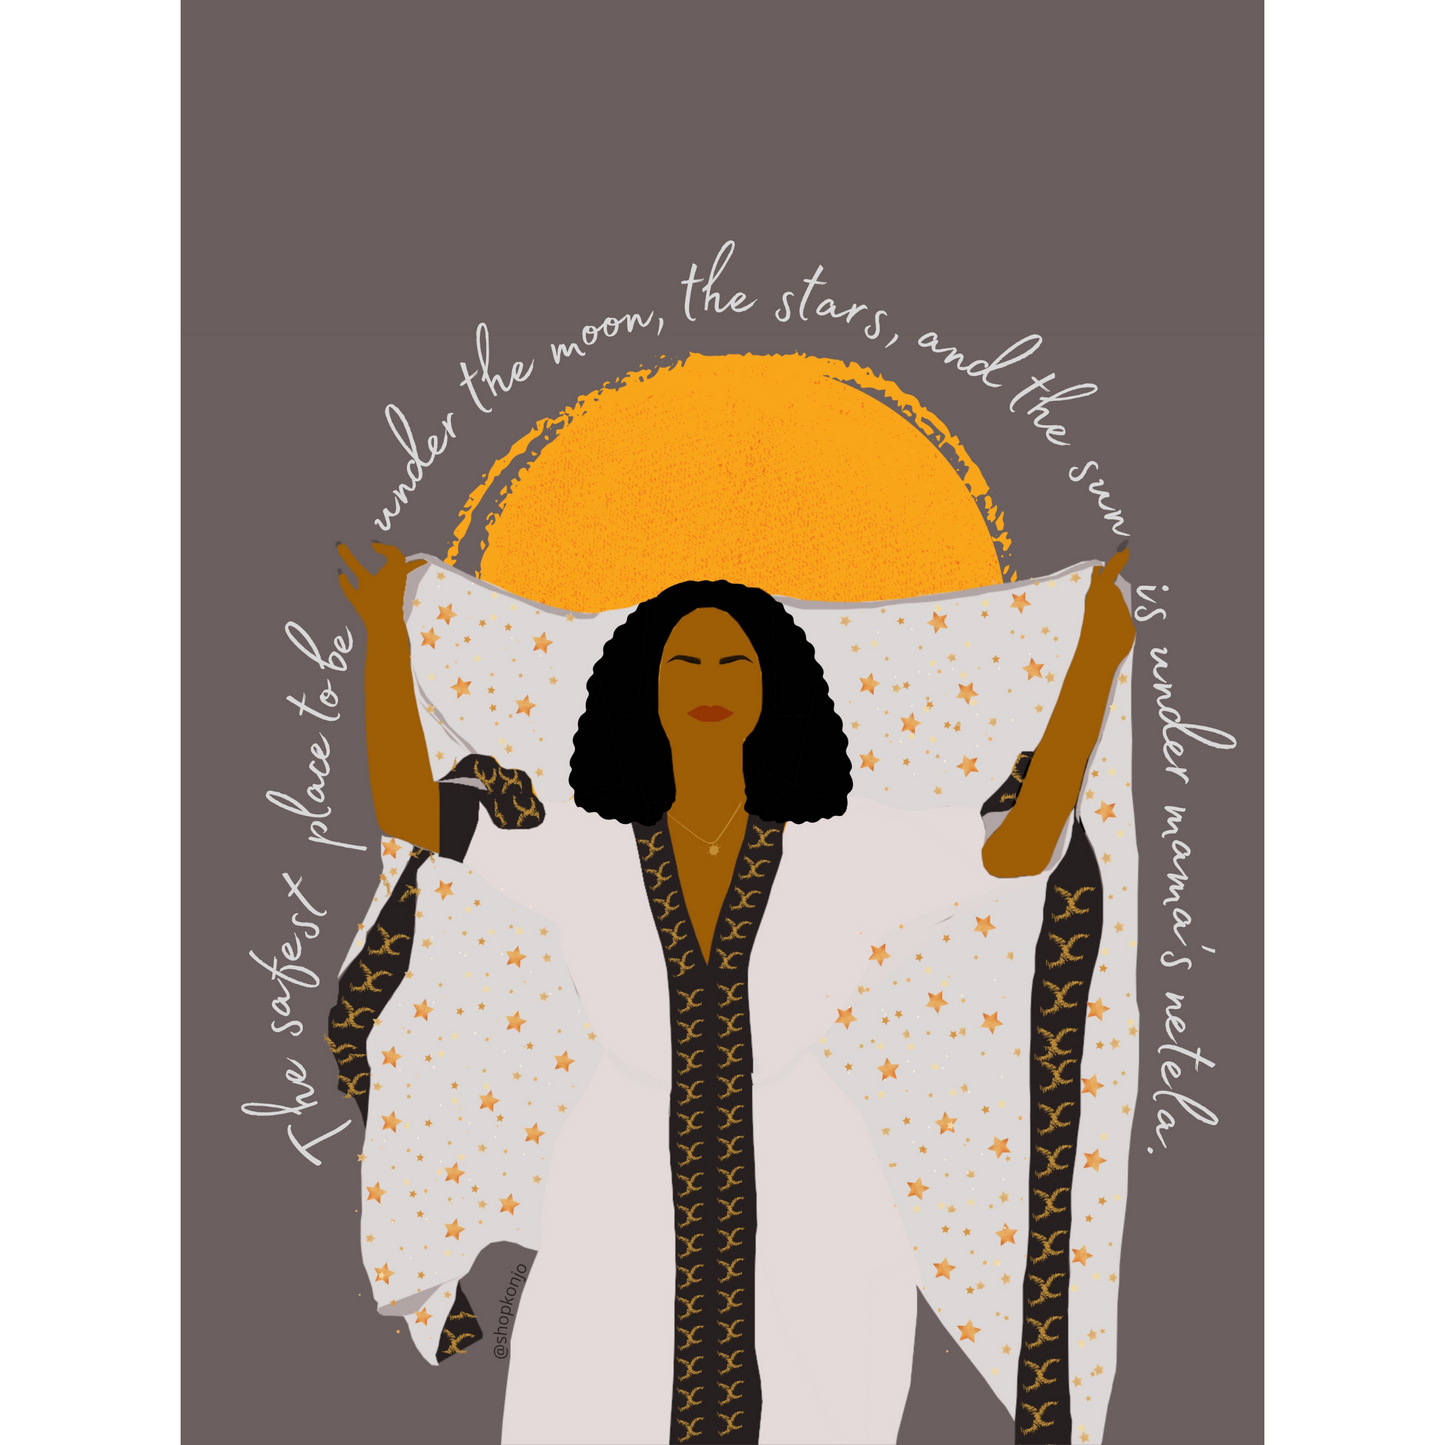 The Safest Place To Be Under The Moon, The Stars, And The Sky, Is Under Mama's Netela (12x16) Art Print